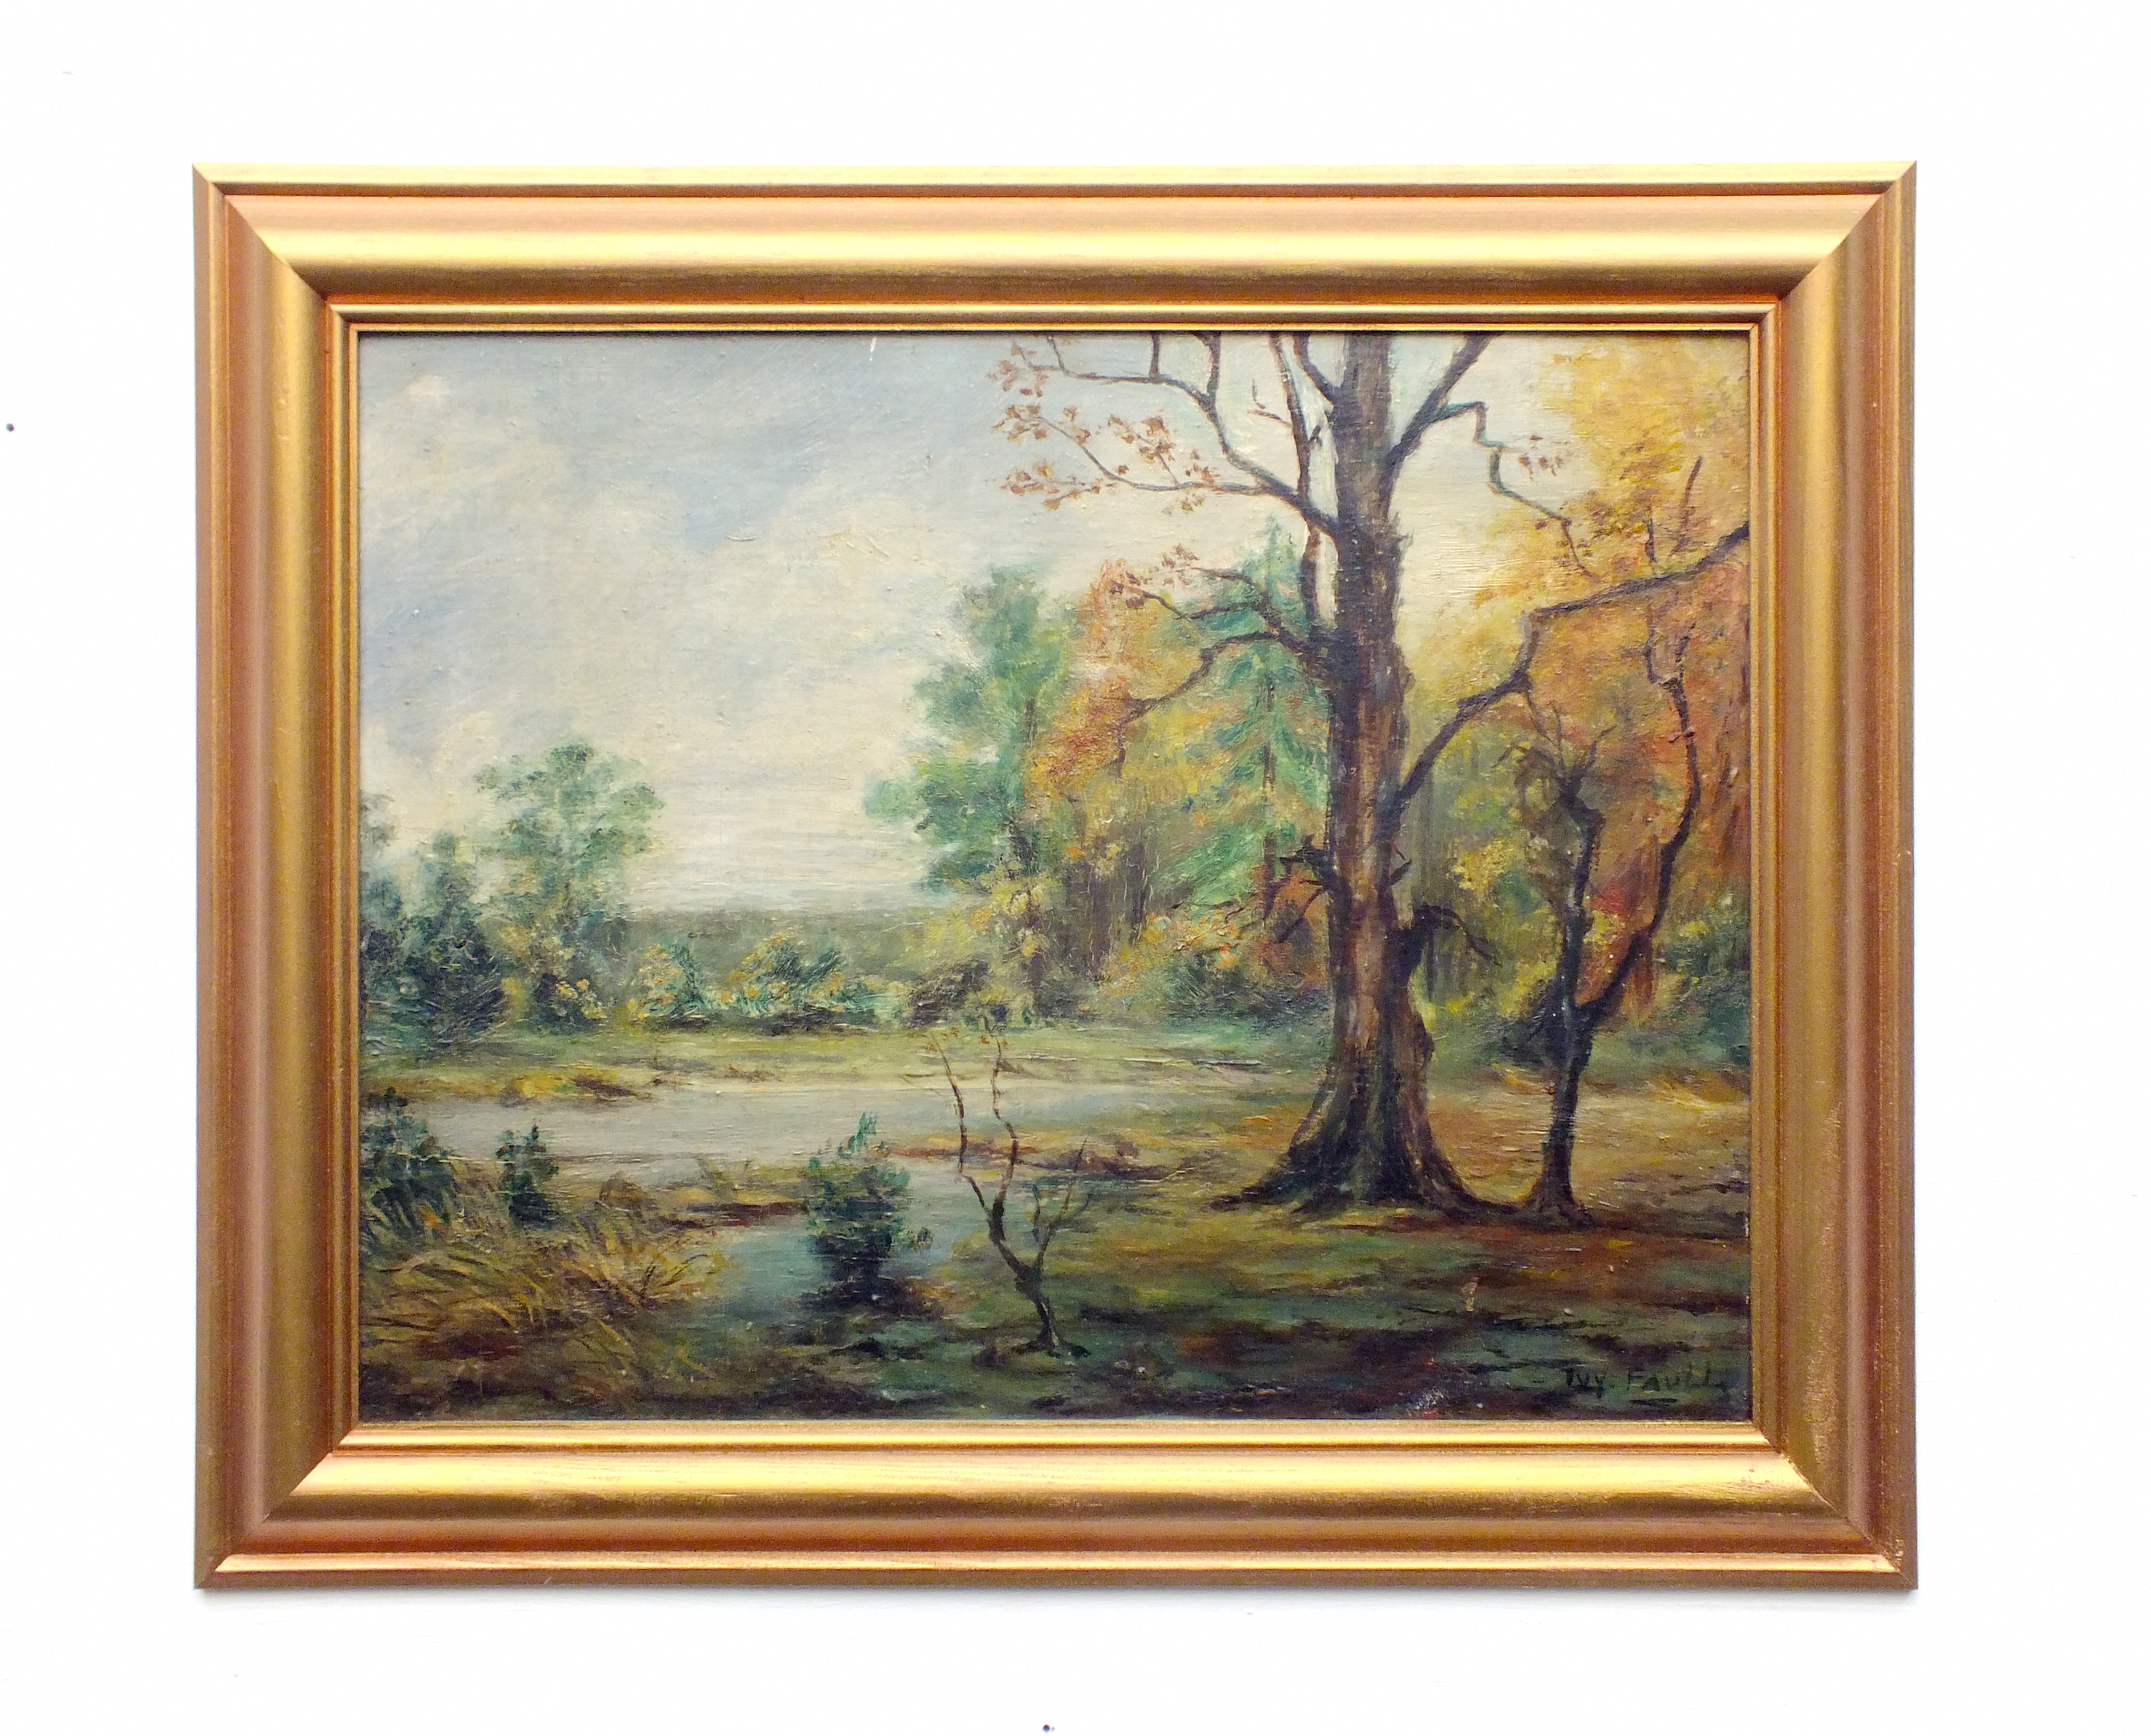 Cumbria Forest English Landscape Oil Painting Framed